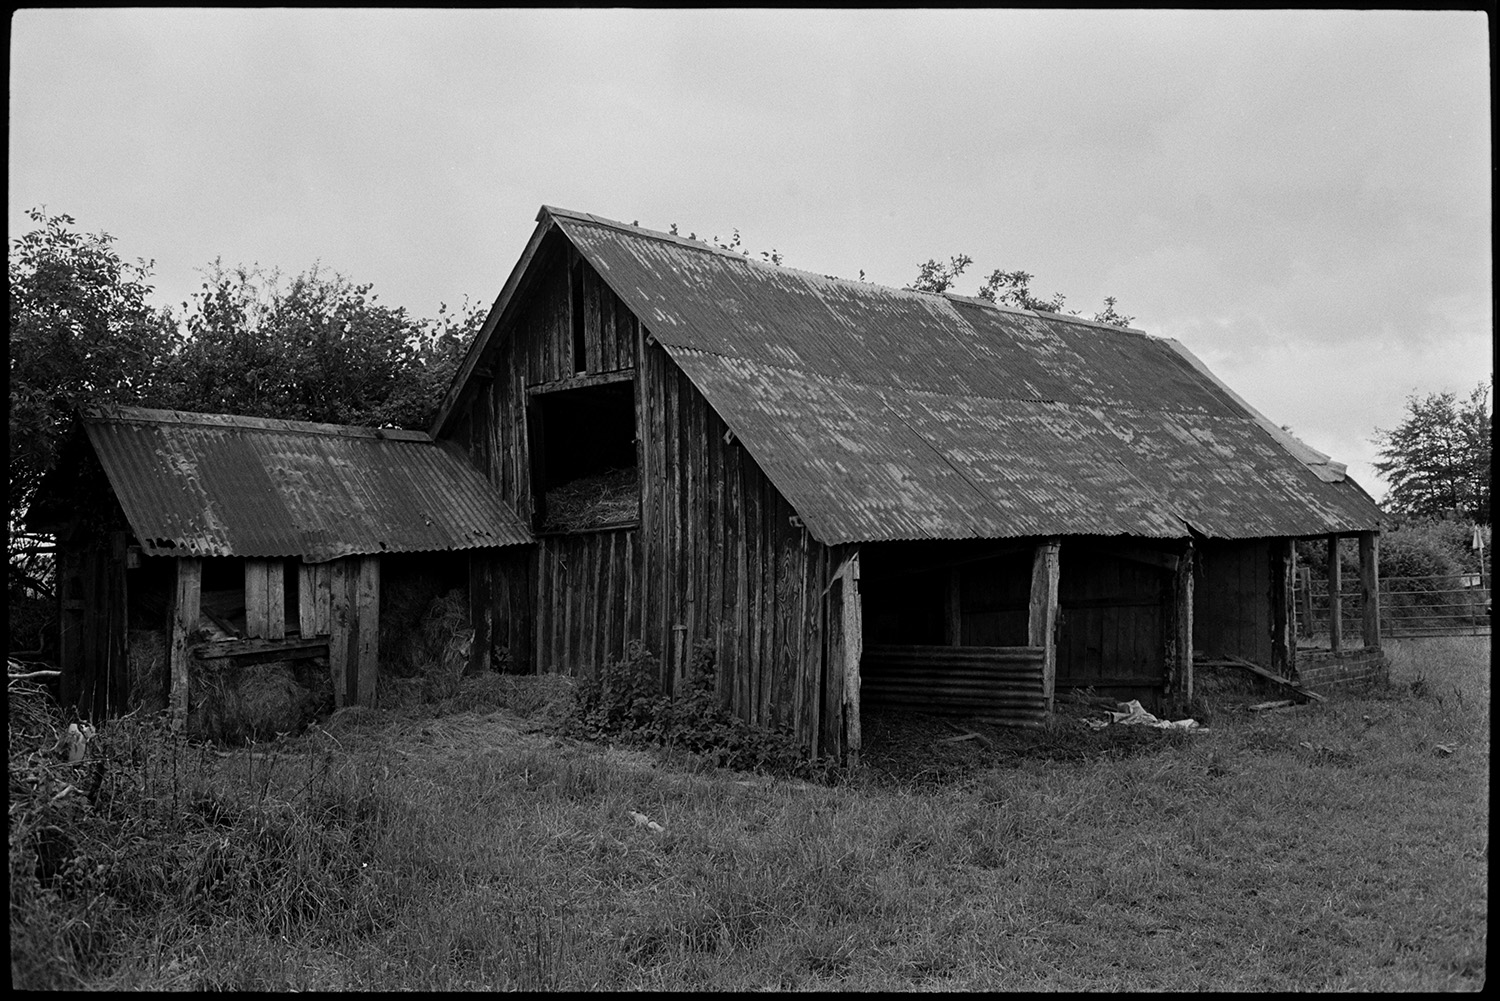 Barn, wooden construction with corrugated iron roof.
[An old large wooden barn with corrugated roof and tallet in a field, possibly near Burrington.]